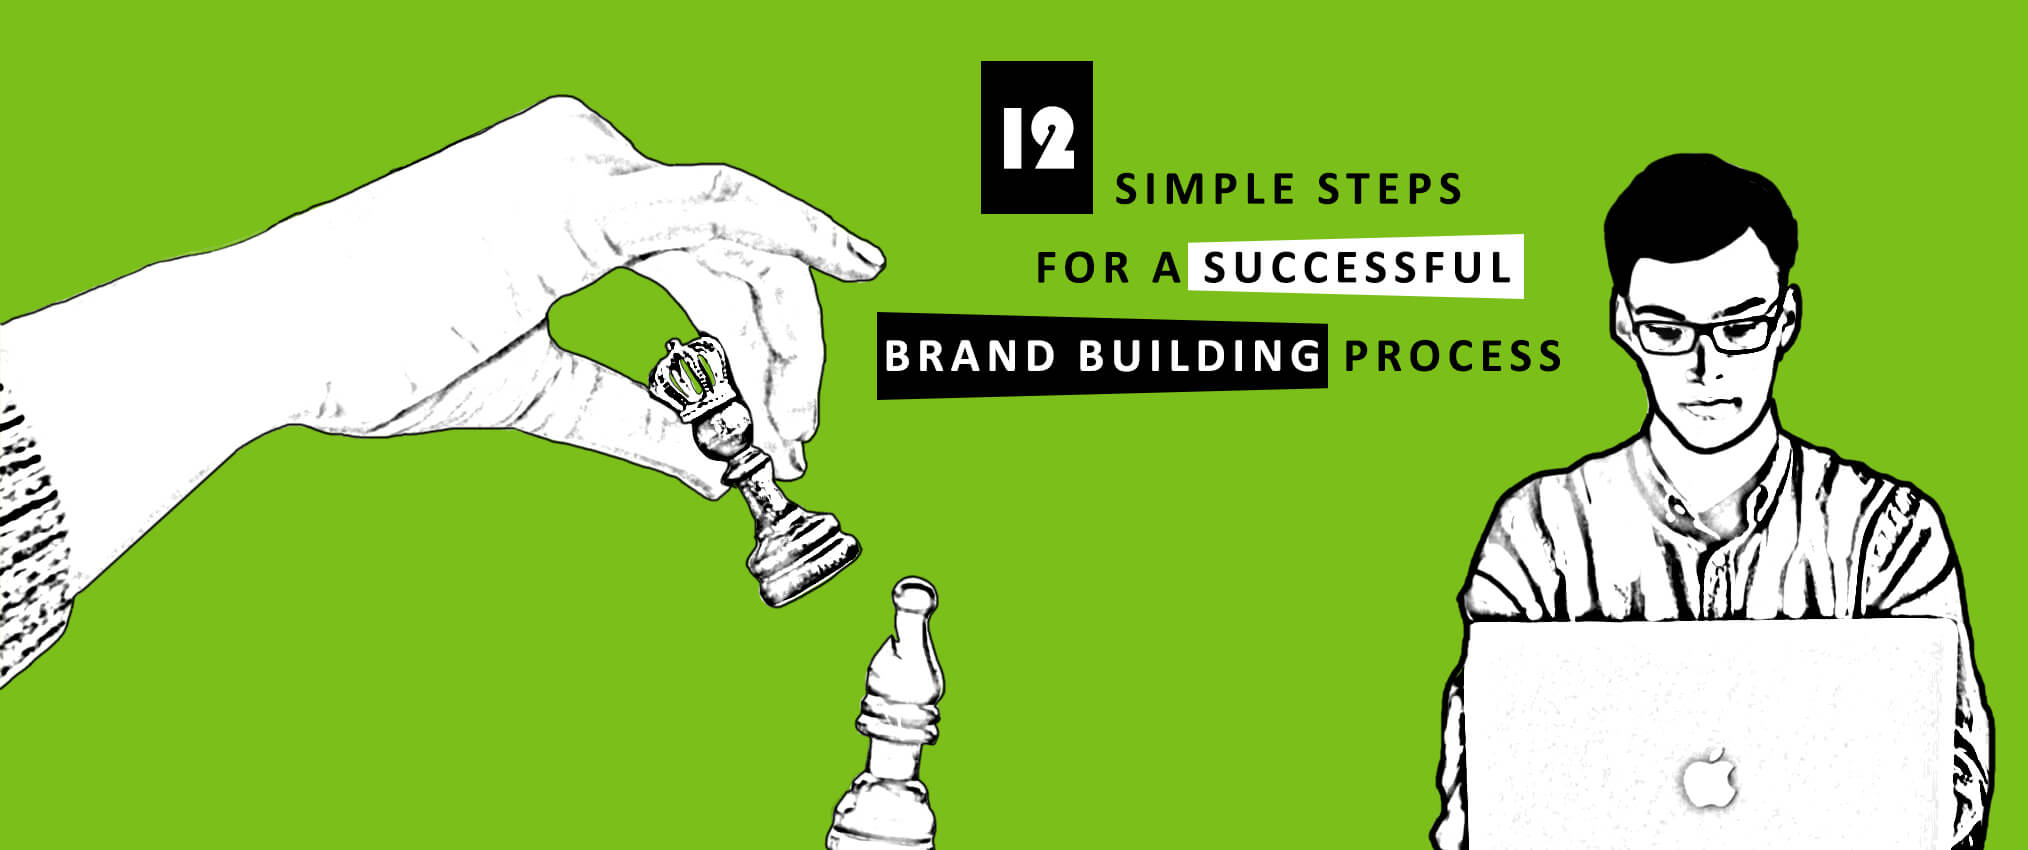 12 simple steps for a successful brand building process